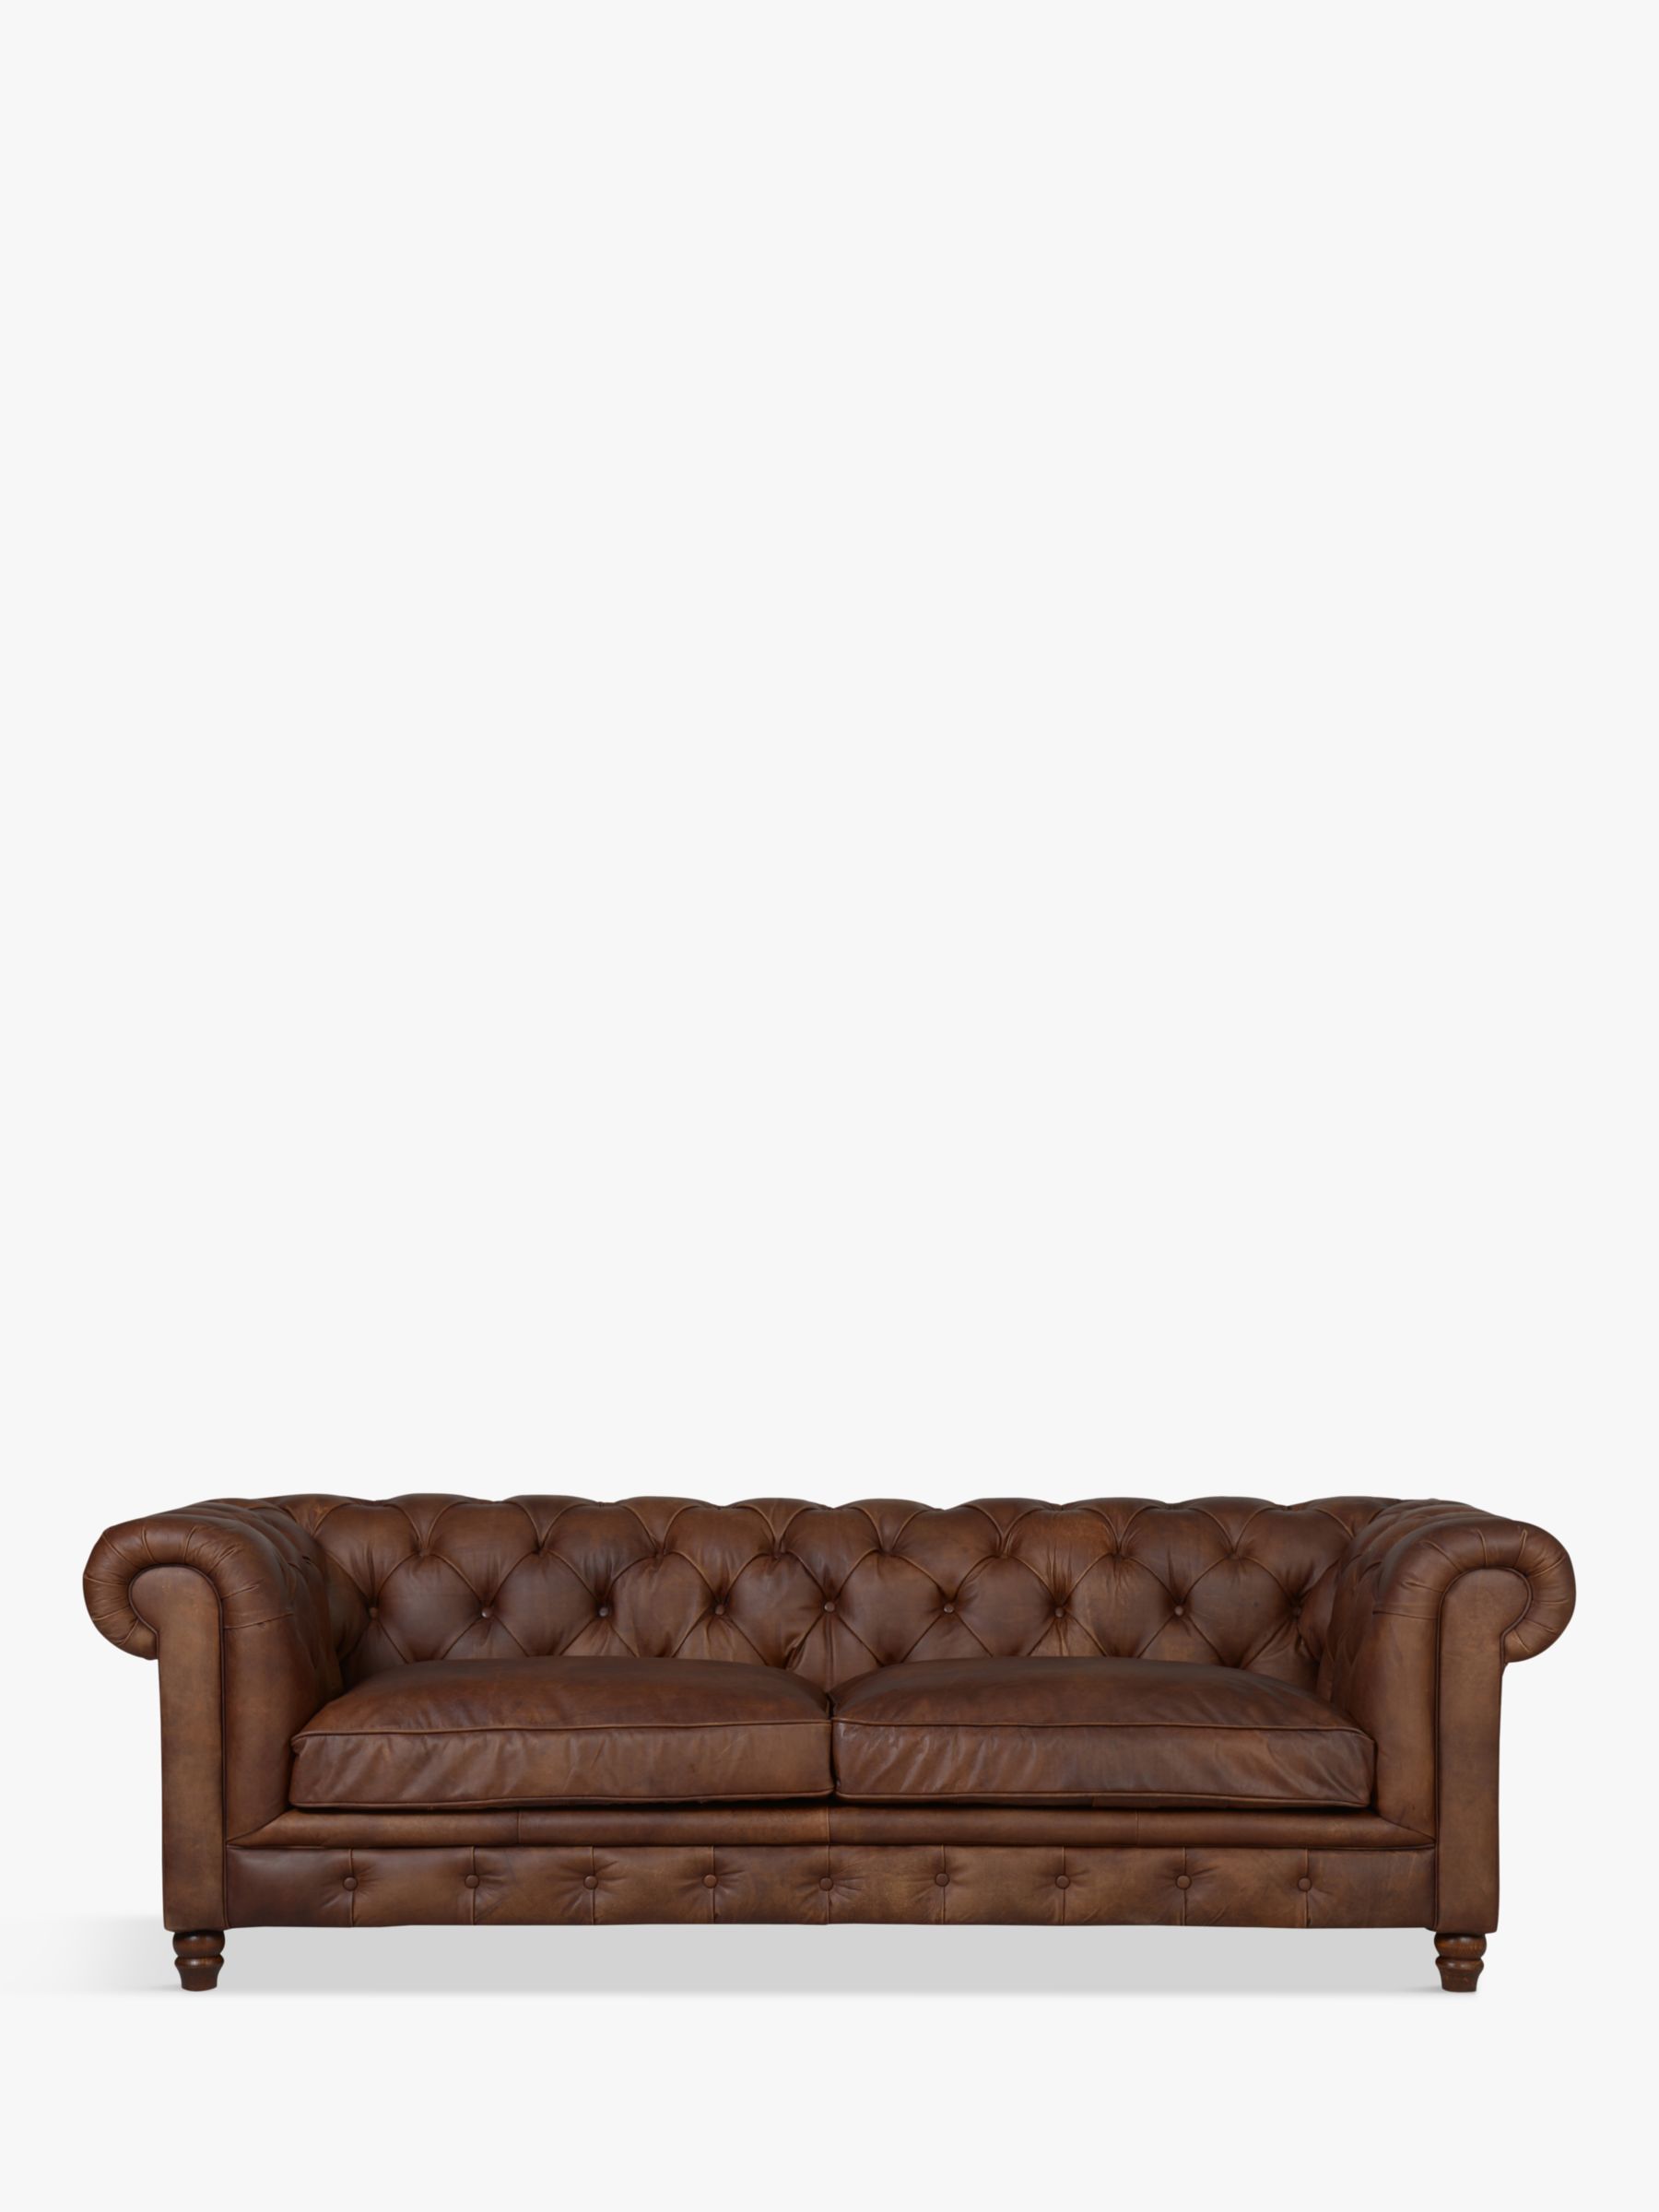 Halo Earle Chesterfield Grand 4 Seater Leather Sofa